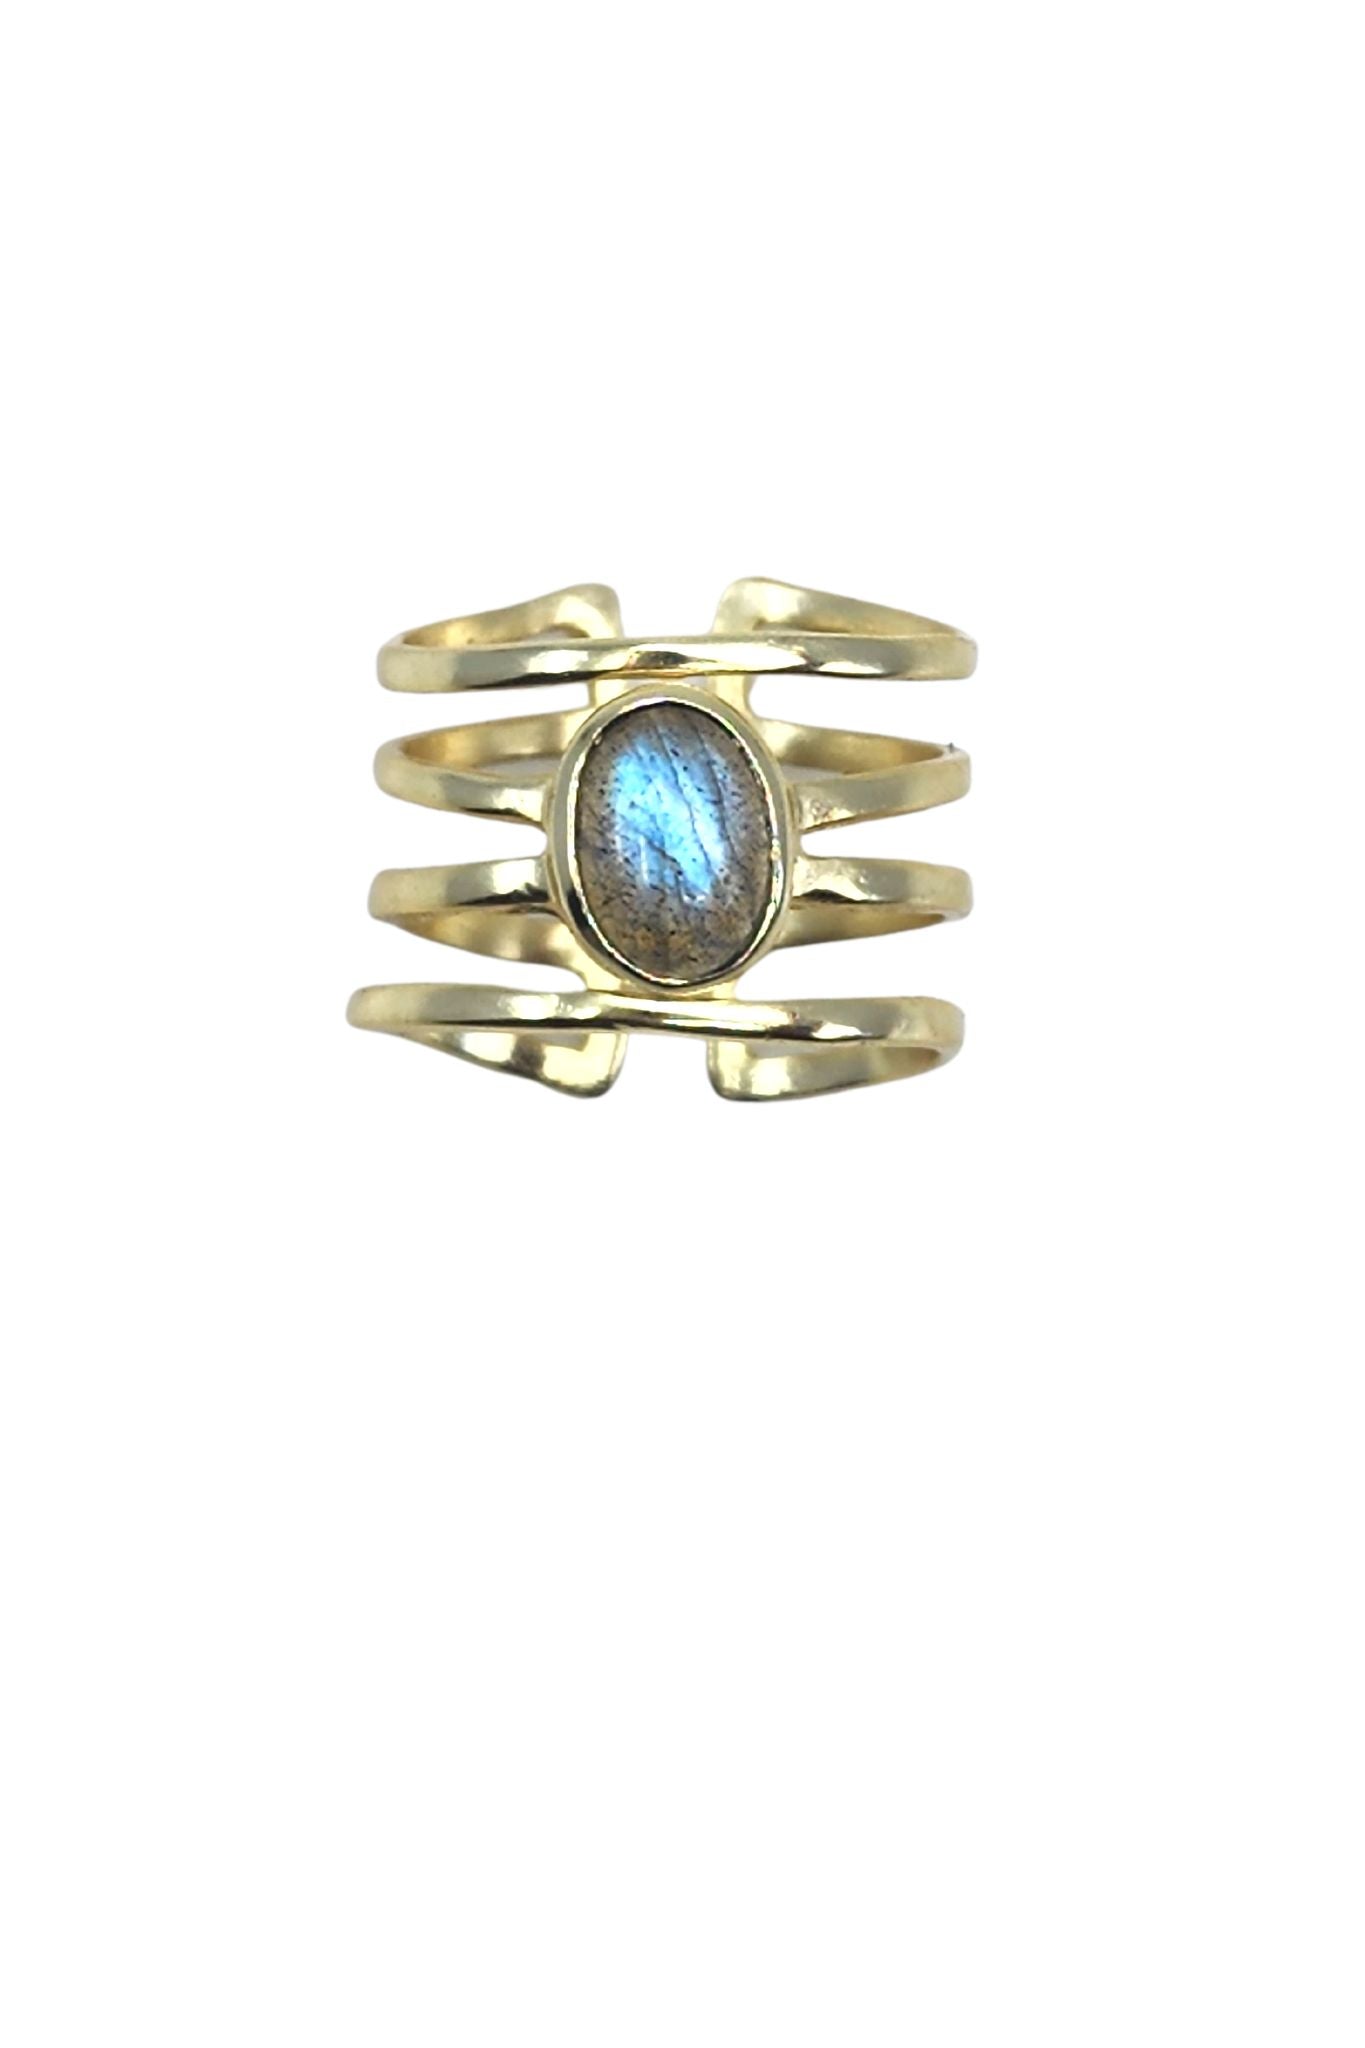 Fancy Band with Labradorite Stone Ring